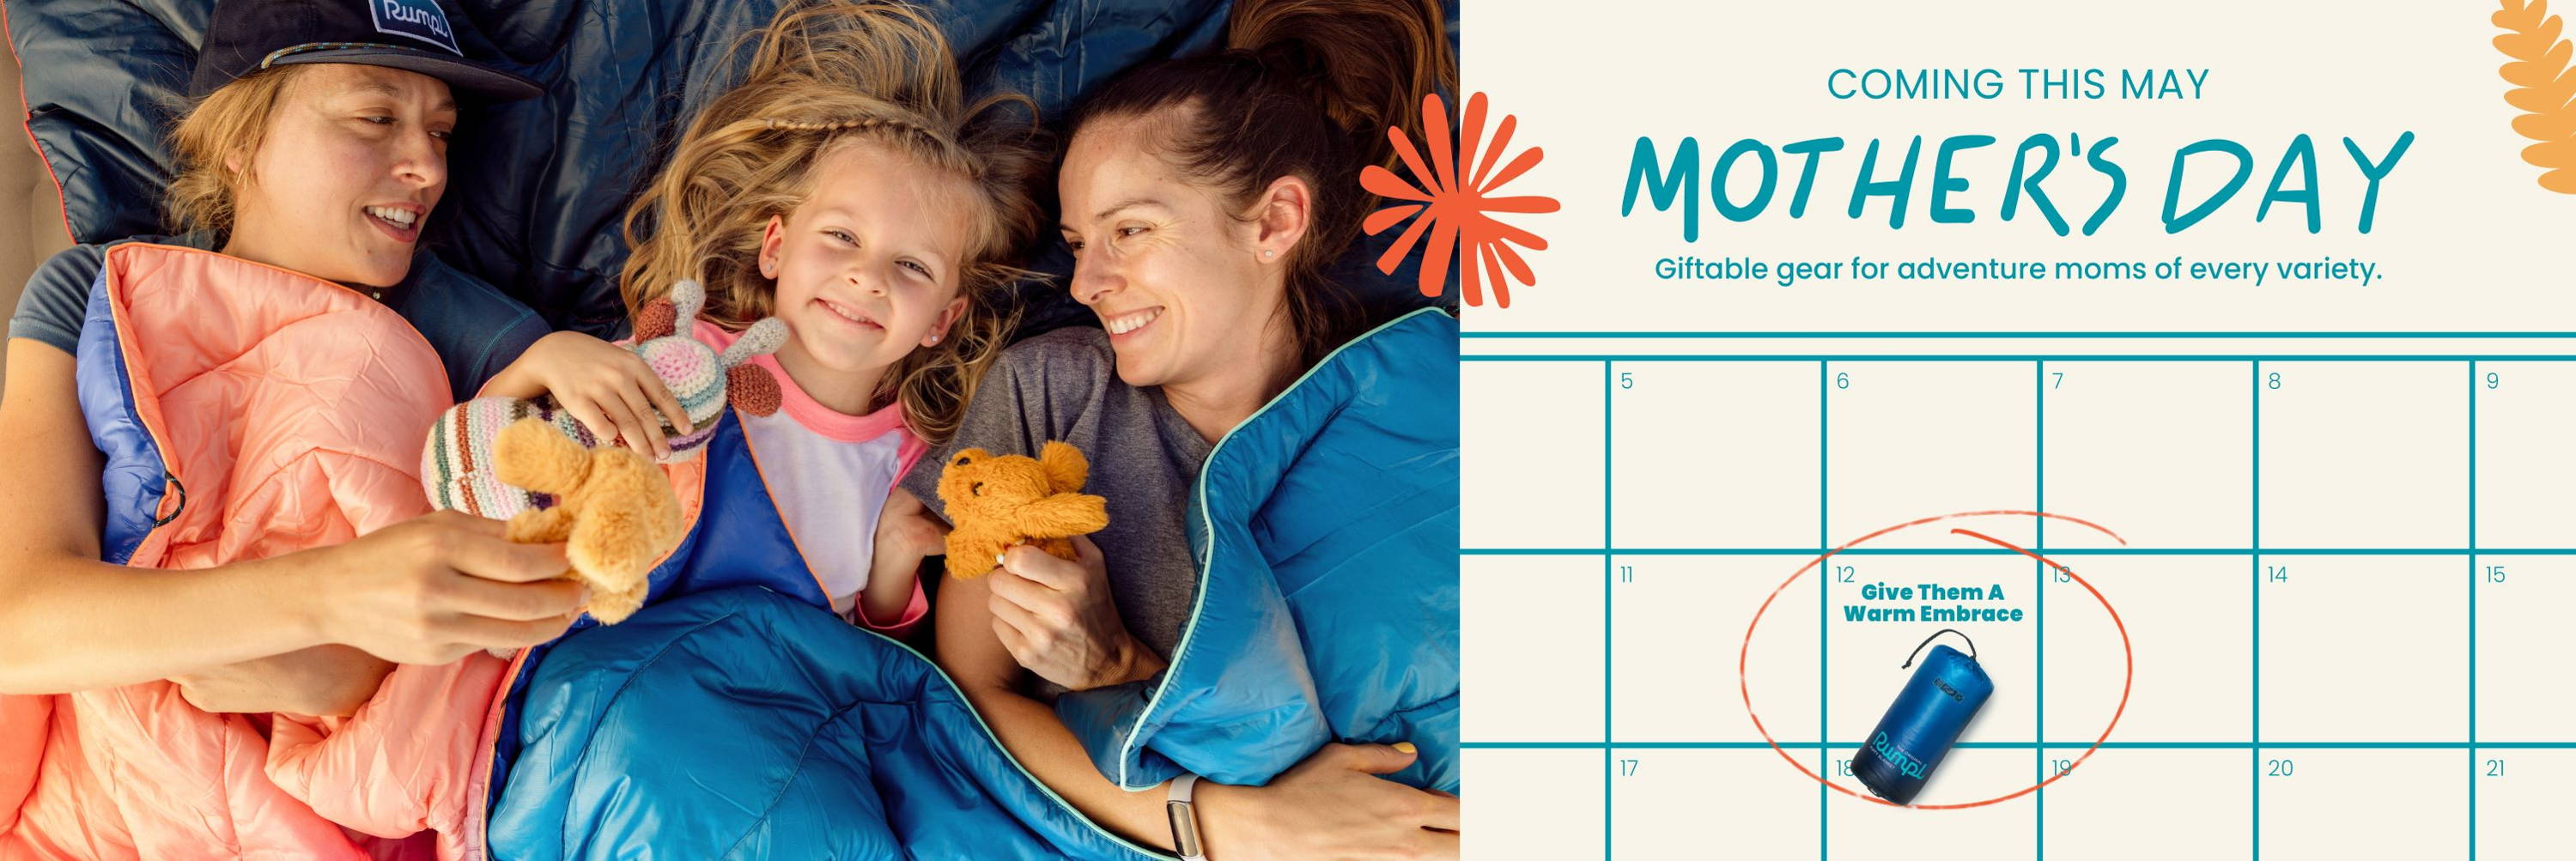 Mother's Day Gifts | Giftable gear for adventure moms of every variety.